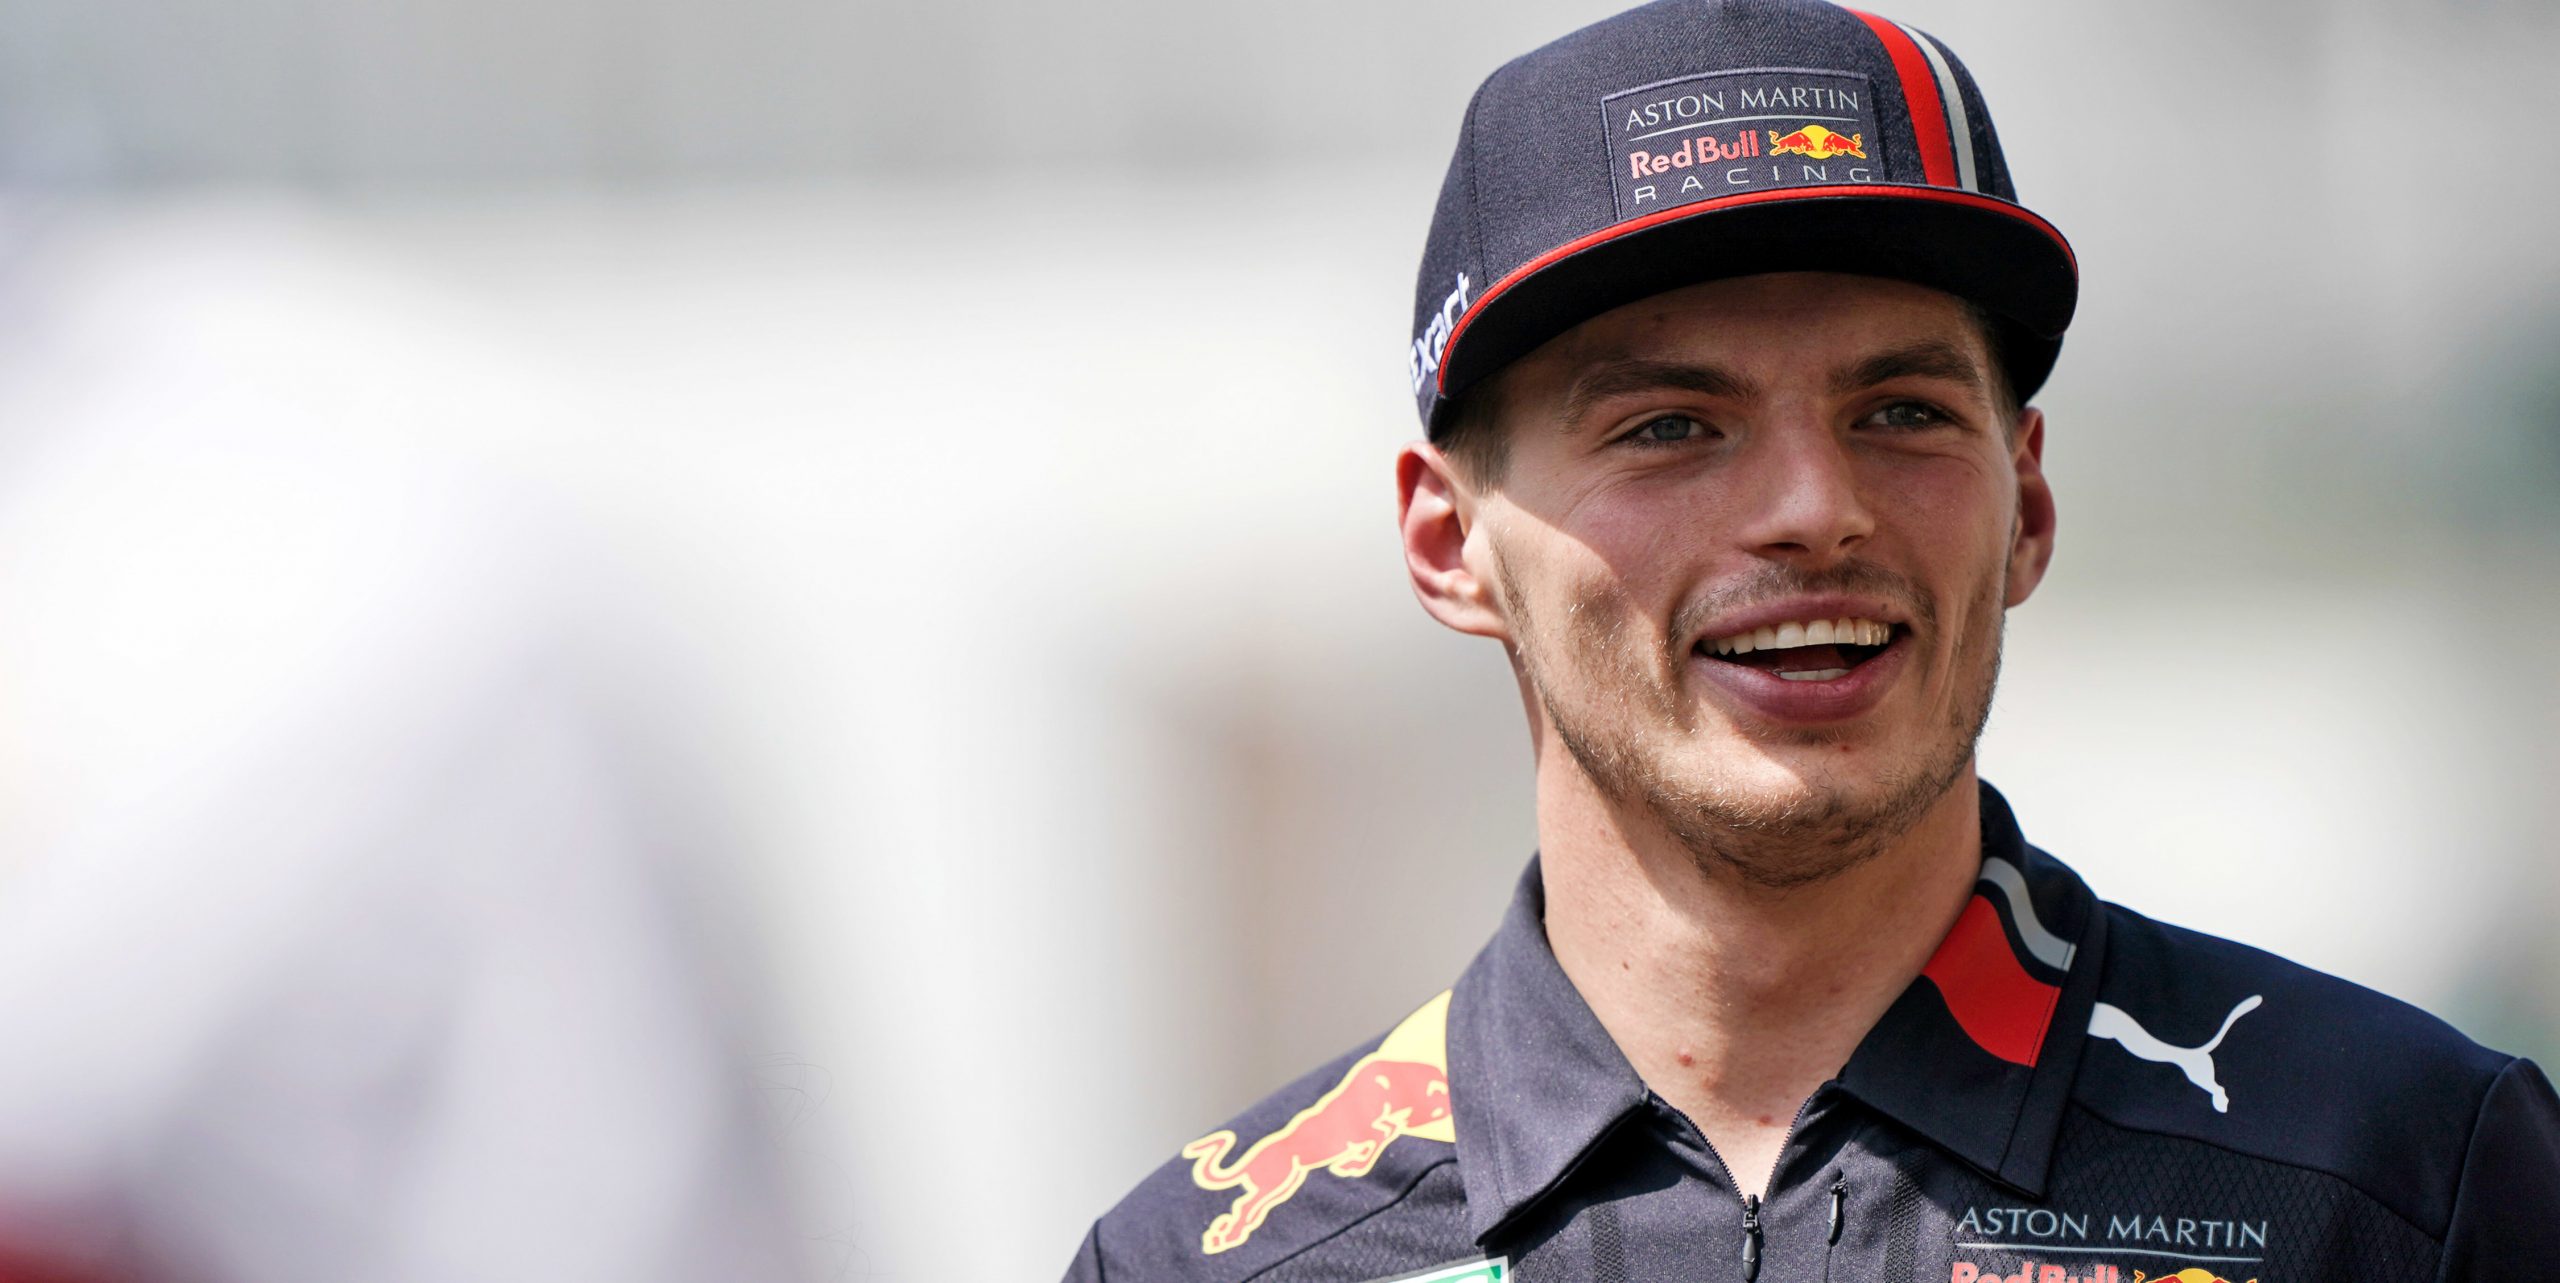 Red Bull Racing's Dutch rider Max Verstappen wants to come closer to Lewis Hamilton during the 2020 F1 season